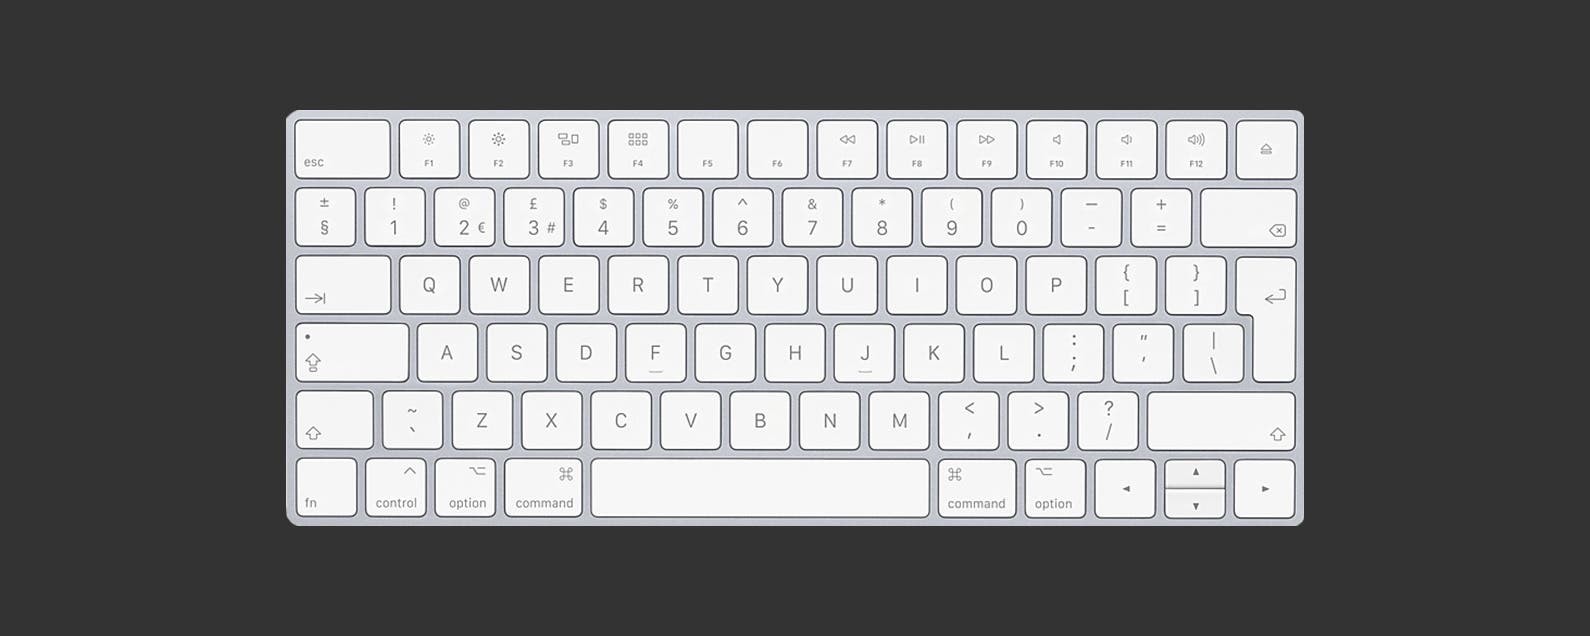 How to Set Up an Apple (or Other Bluetooth) Keyboard to Work with an iPhone